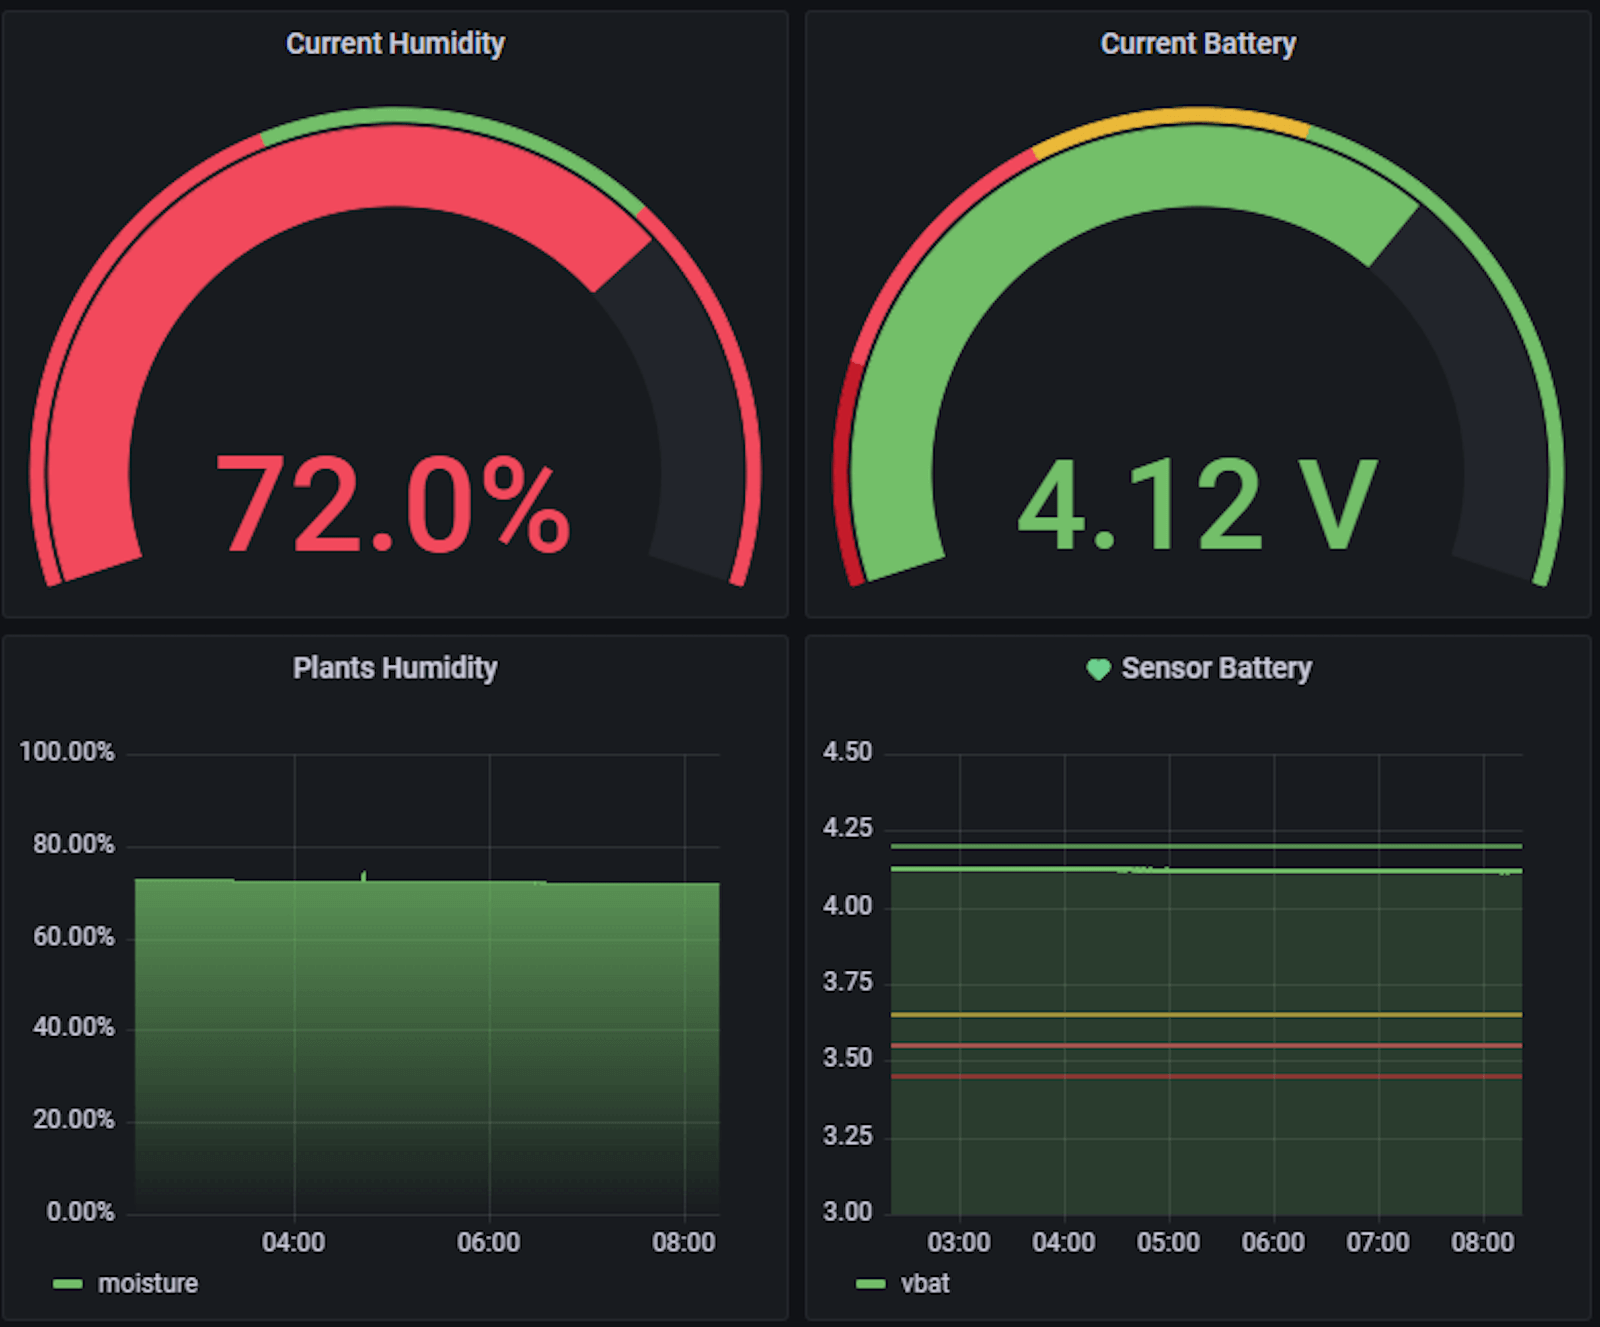 Orchid humidity and battery level for low power monitoring.